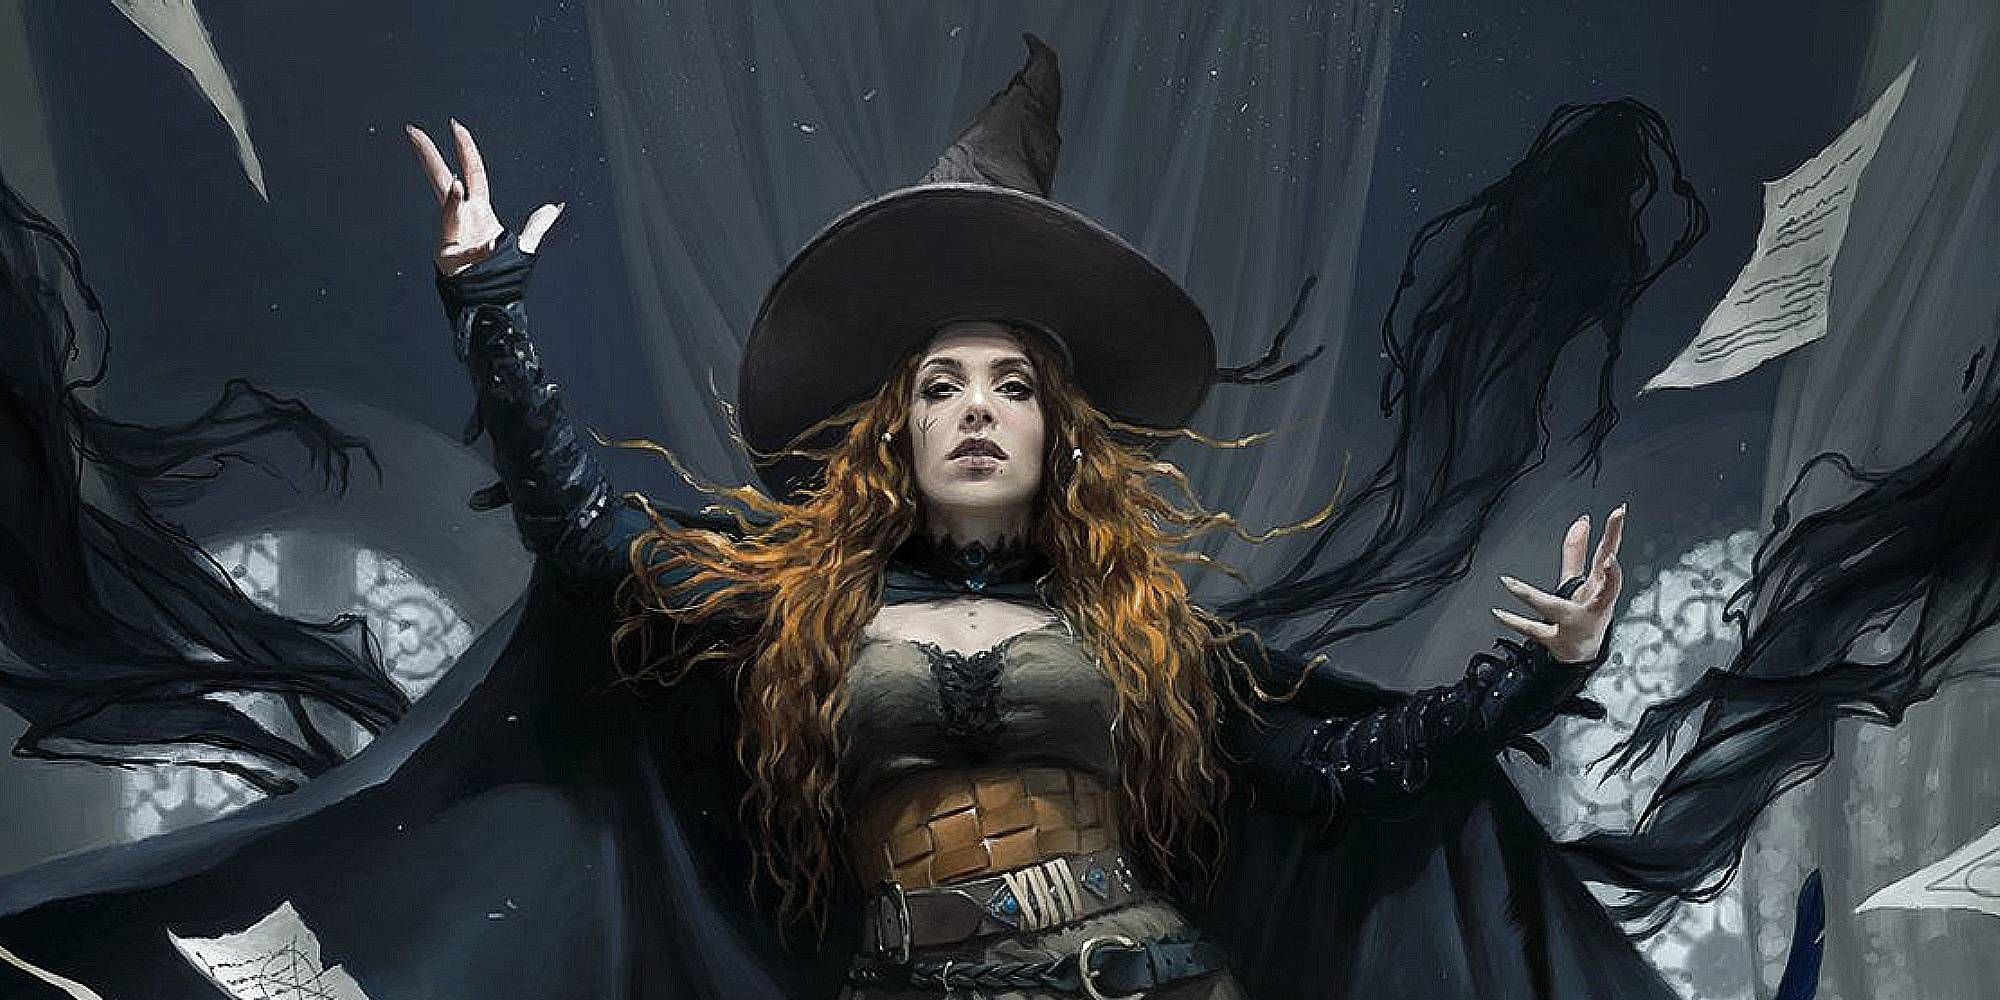 A pale woman in dark clothing and a witch's hat has magic erupt from her